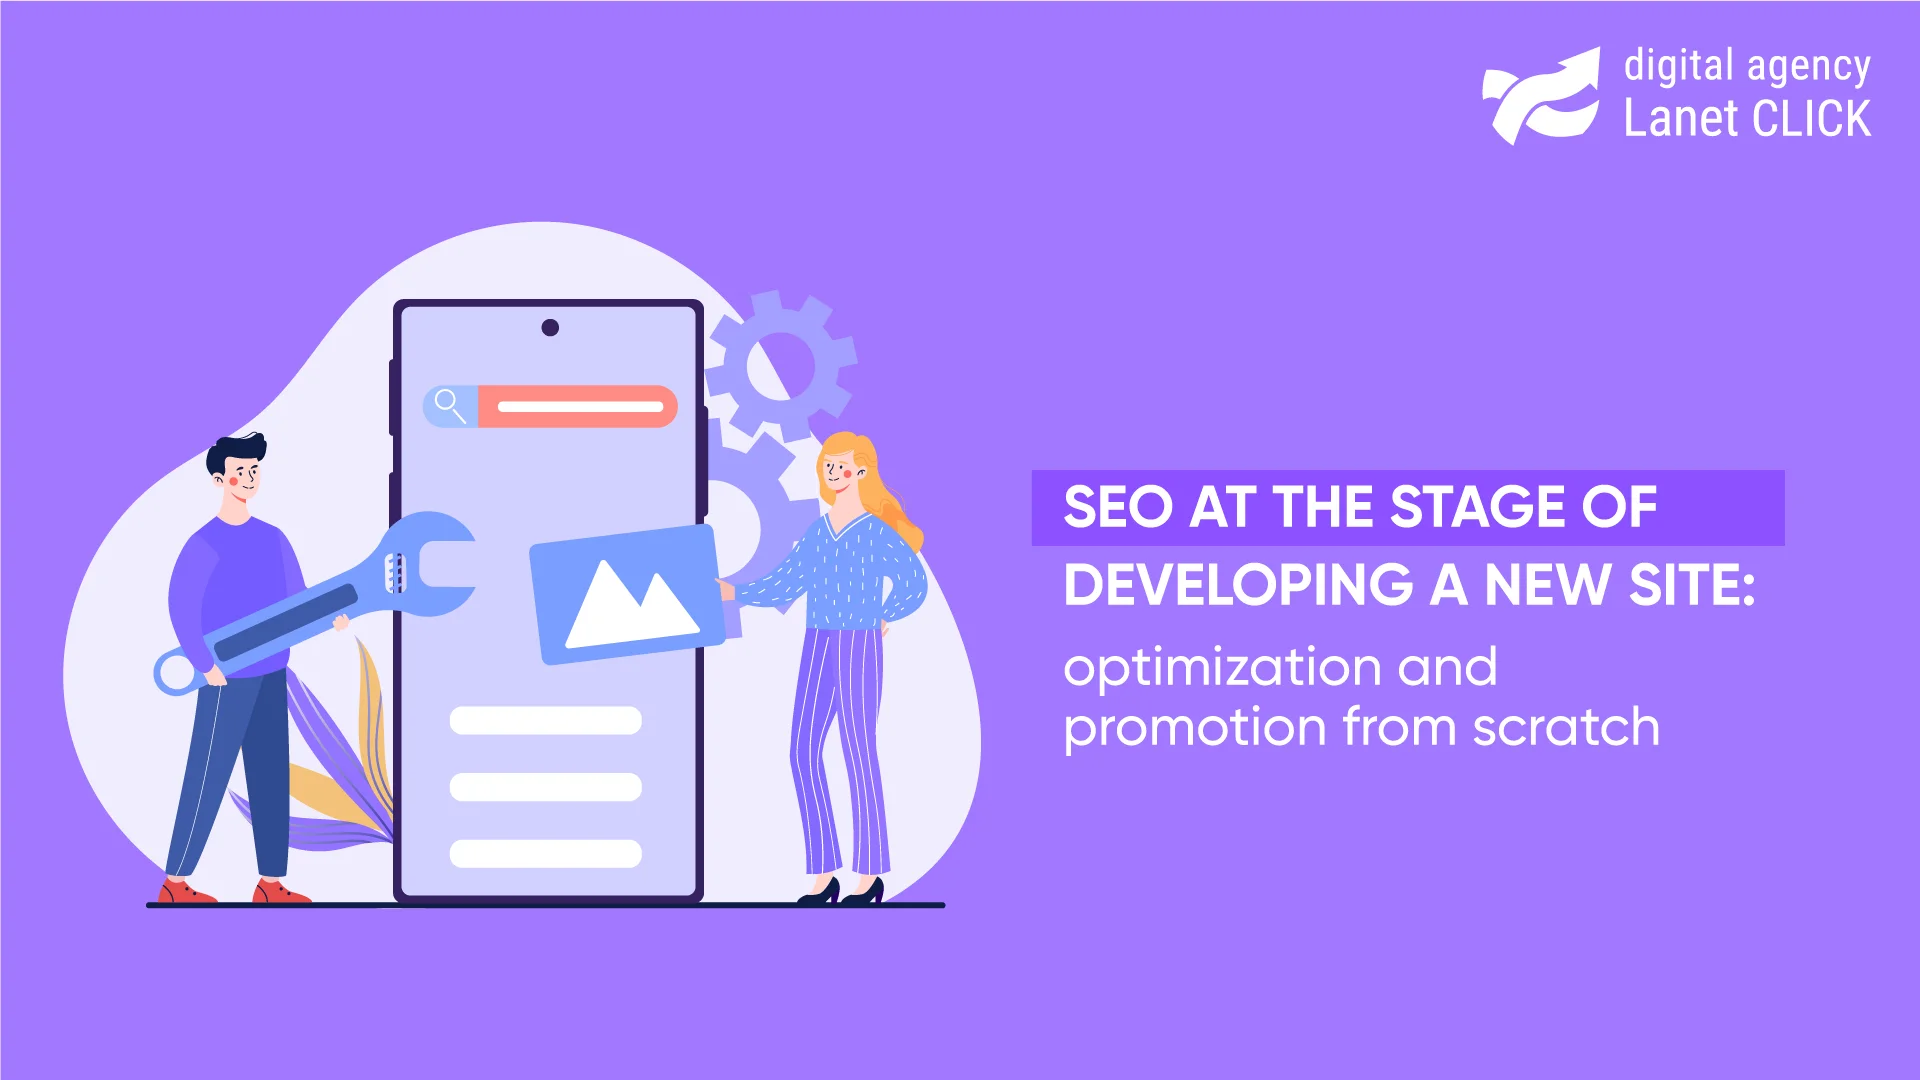 SEO at the stage of developing a new site: optimization and promotion from scratch